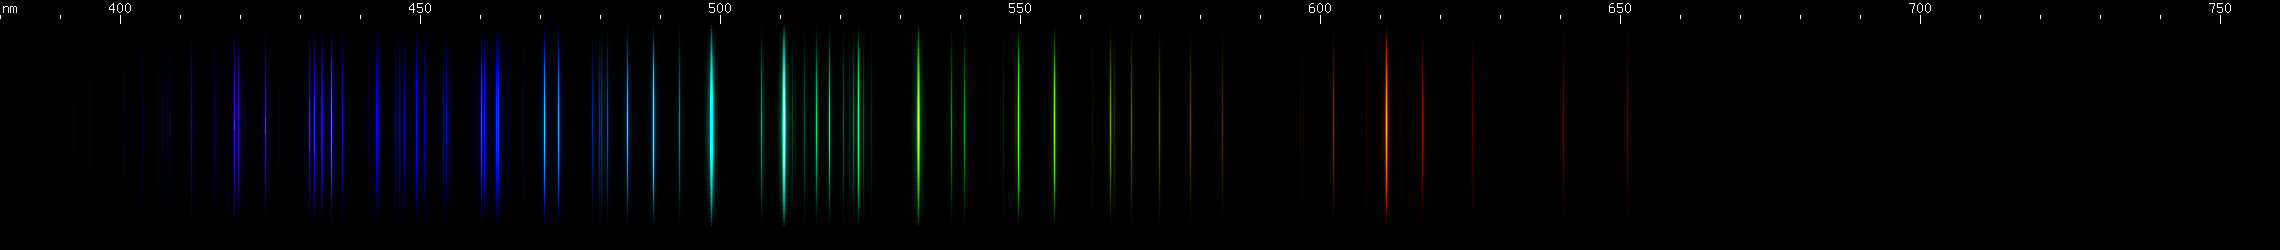 Spectral Lines of Arsenic